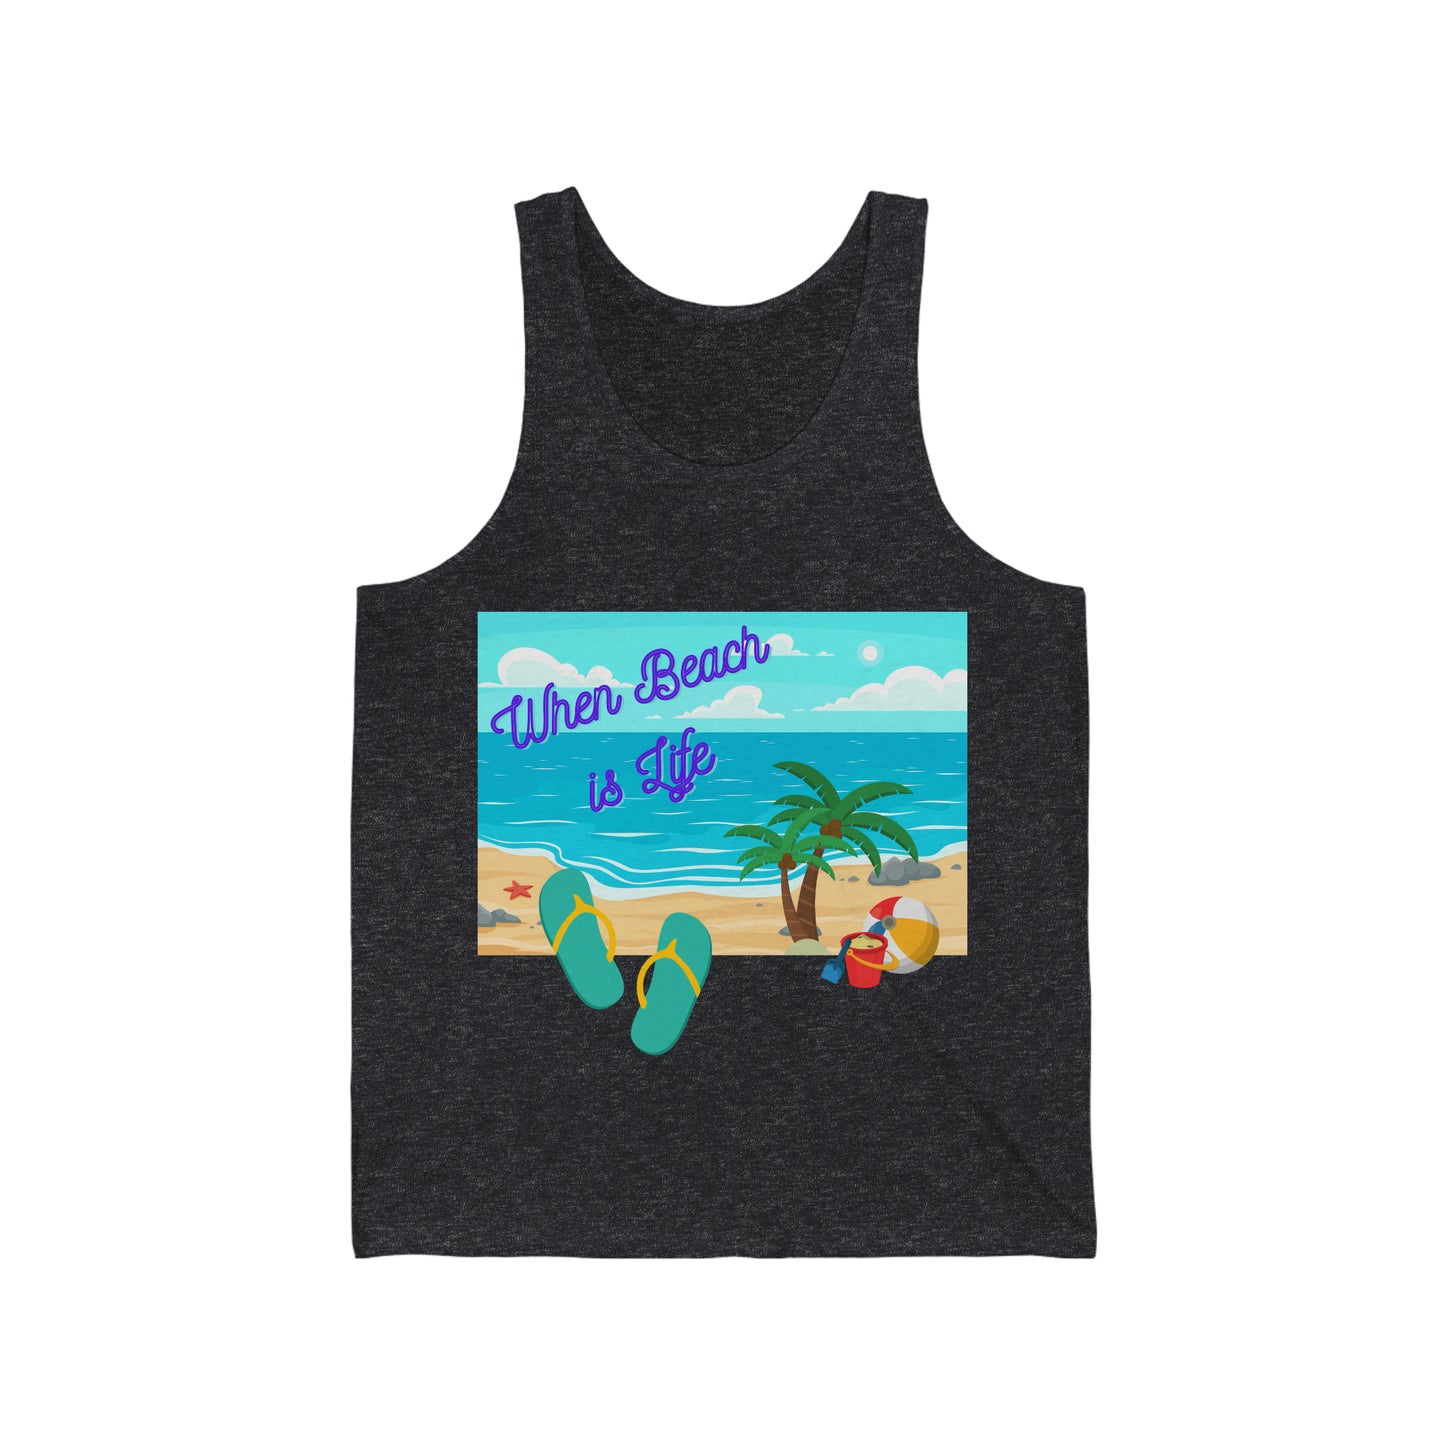 When Beach Is Life, Lifes a Beach In Hawaii Unisex Jersey Tank